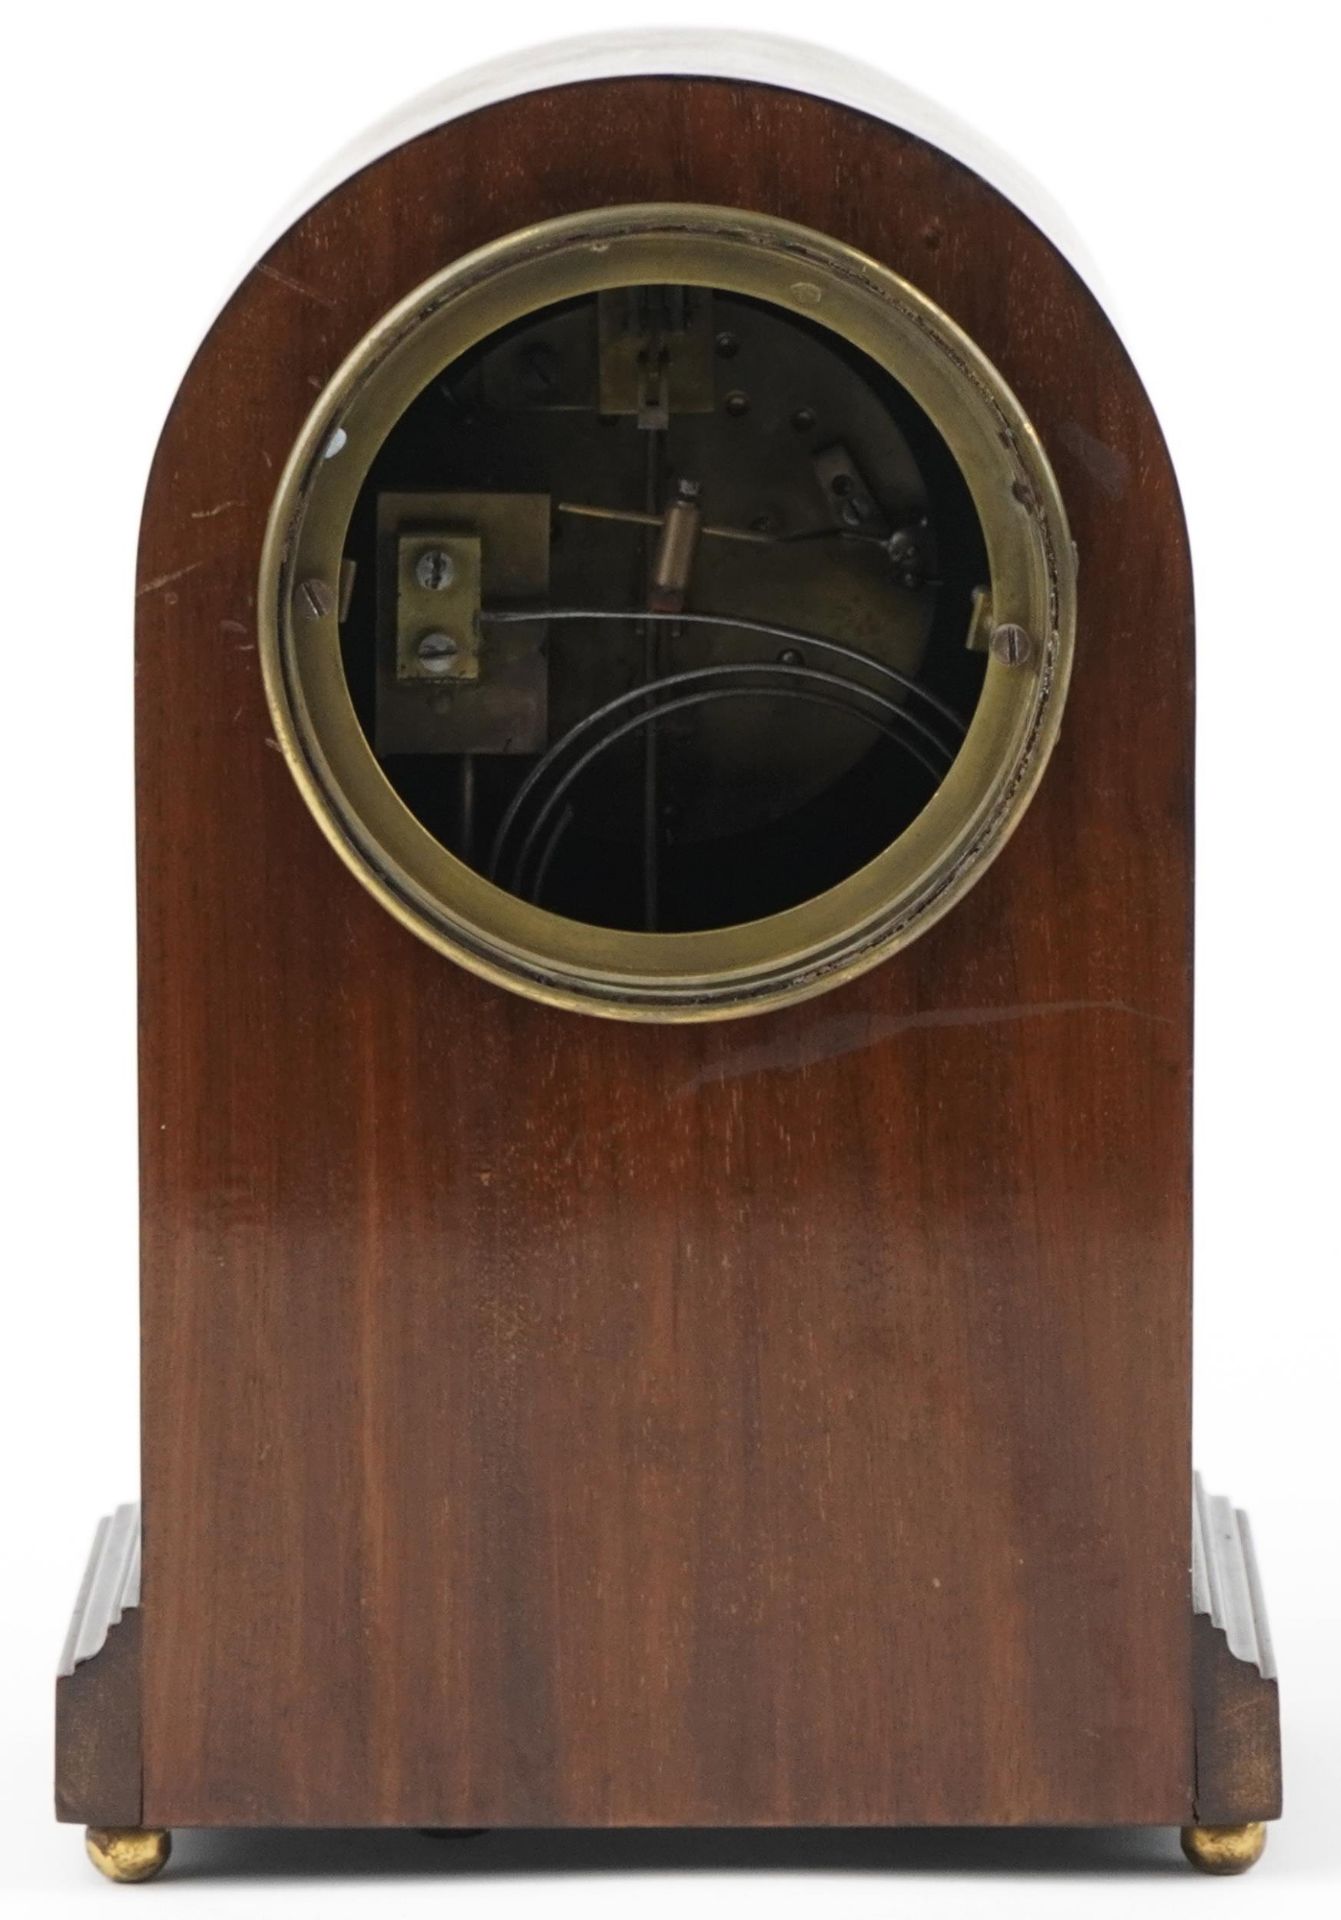 Edwardian inlaid mahogany dome top mantle clock with painted chapter ring having Roman numerals, - Image 3 of 6